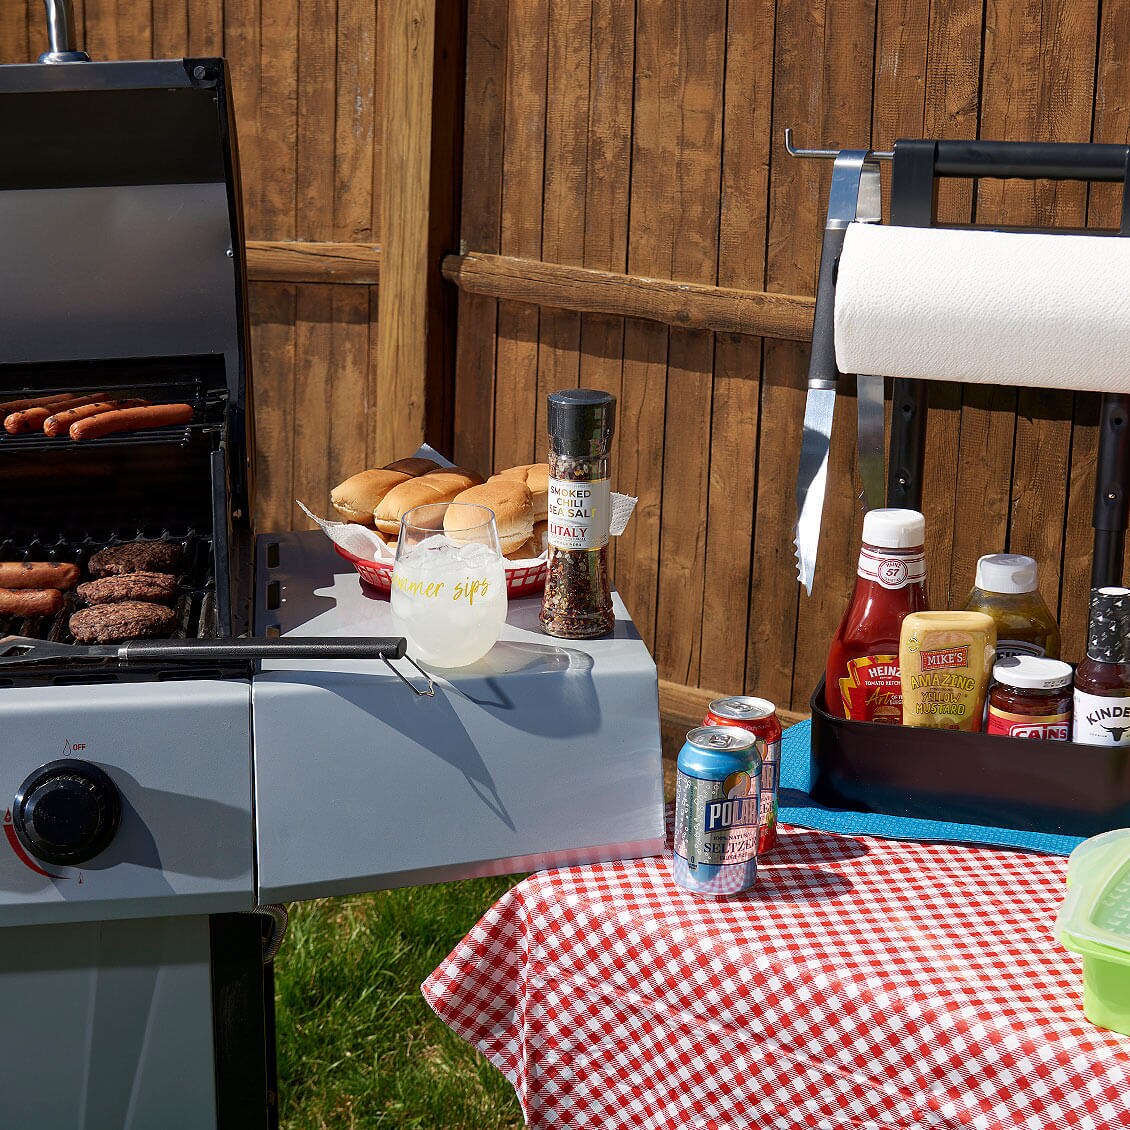 Decorative: Grilling hamburgers and hotdogs with condiments.